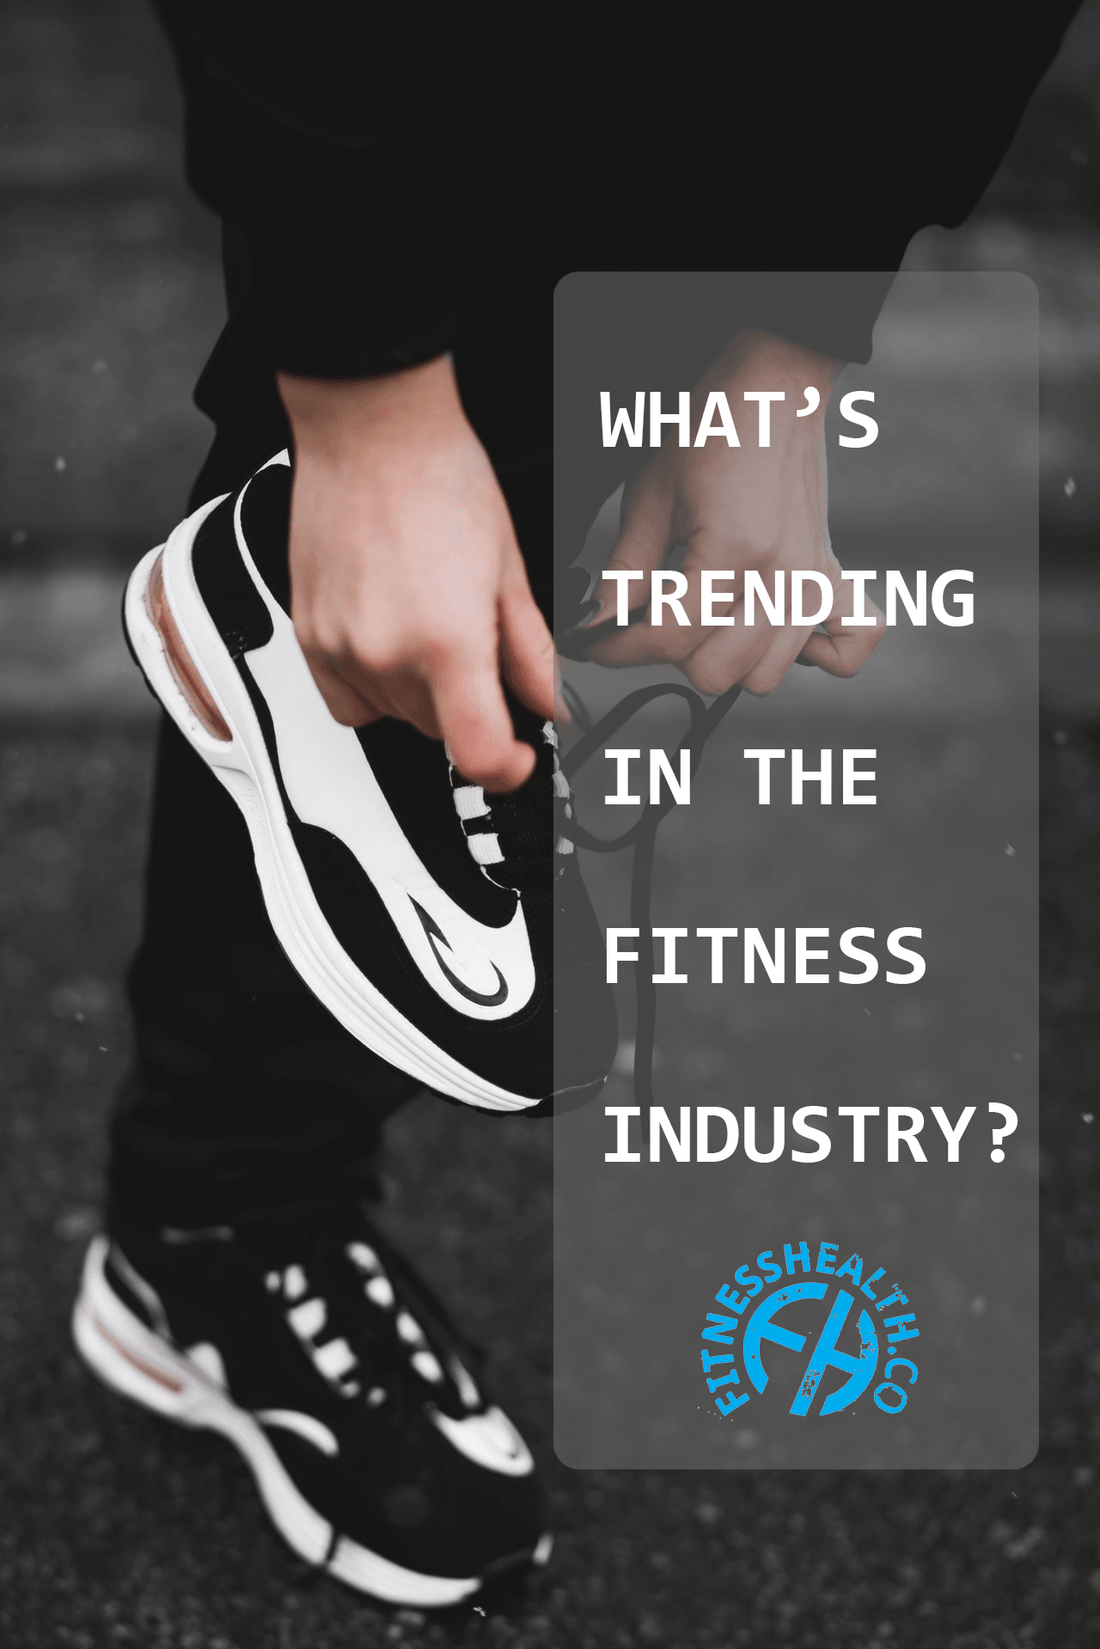 What’s trending in the fitness industry? - Fitness Health 